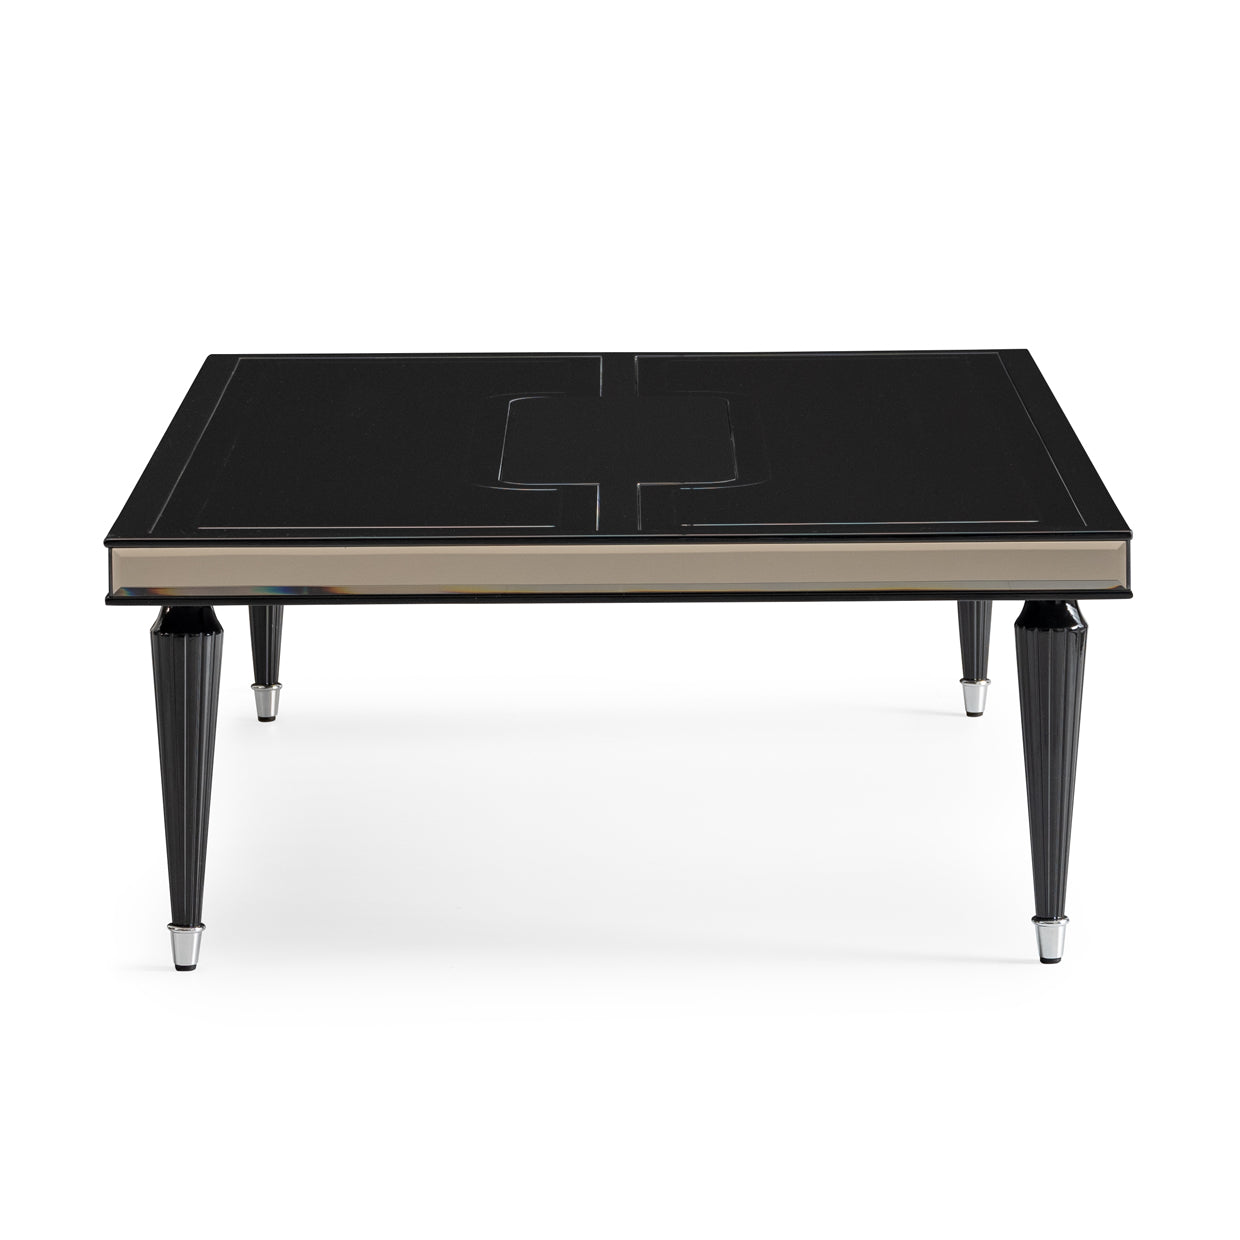 Cocktail Table, Black Ice, Reflective finish, Mirrored top, Contemporary design, Sophisticated charm, Living space enhancement, Refined elegance, Ambiance, Contemporary flair, dream art , Michael amini